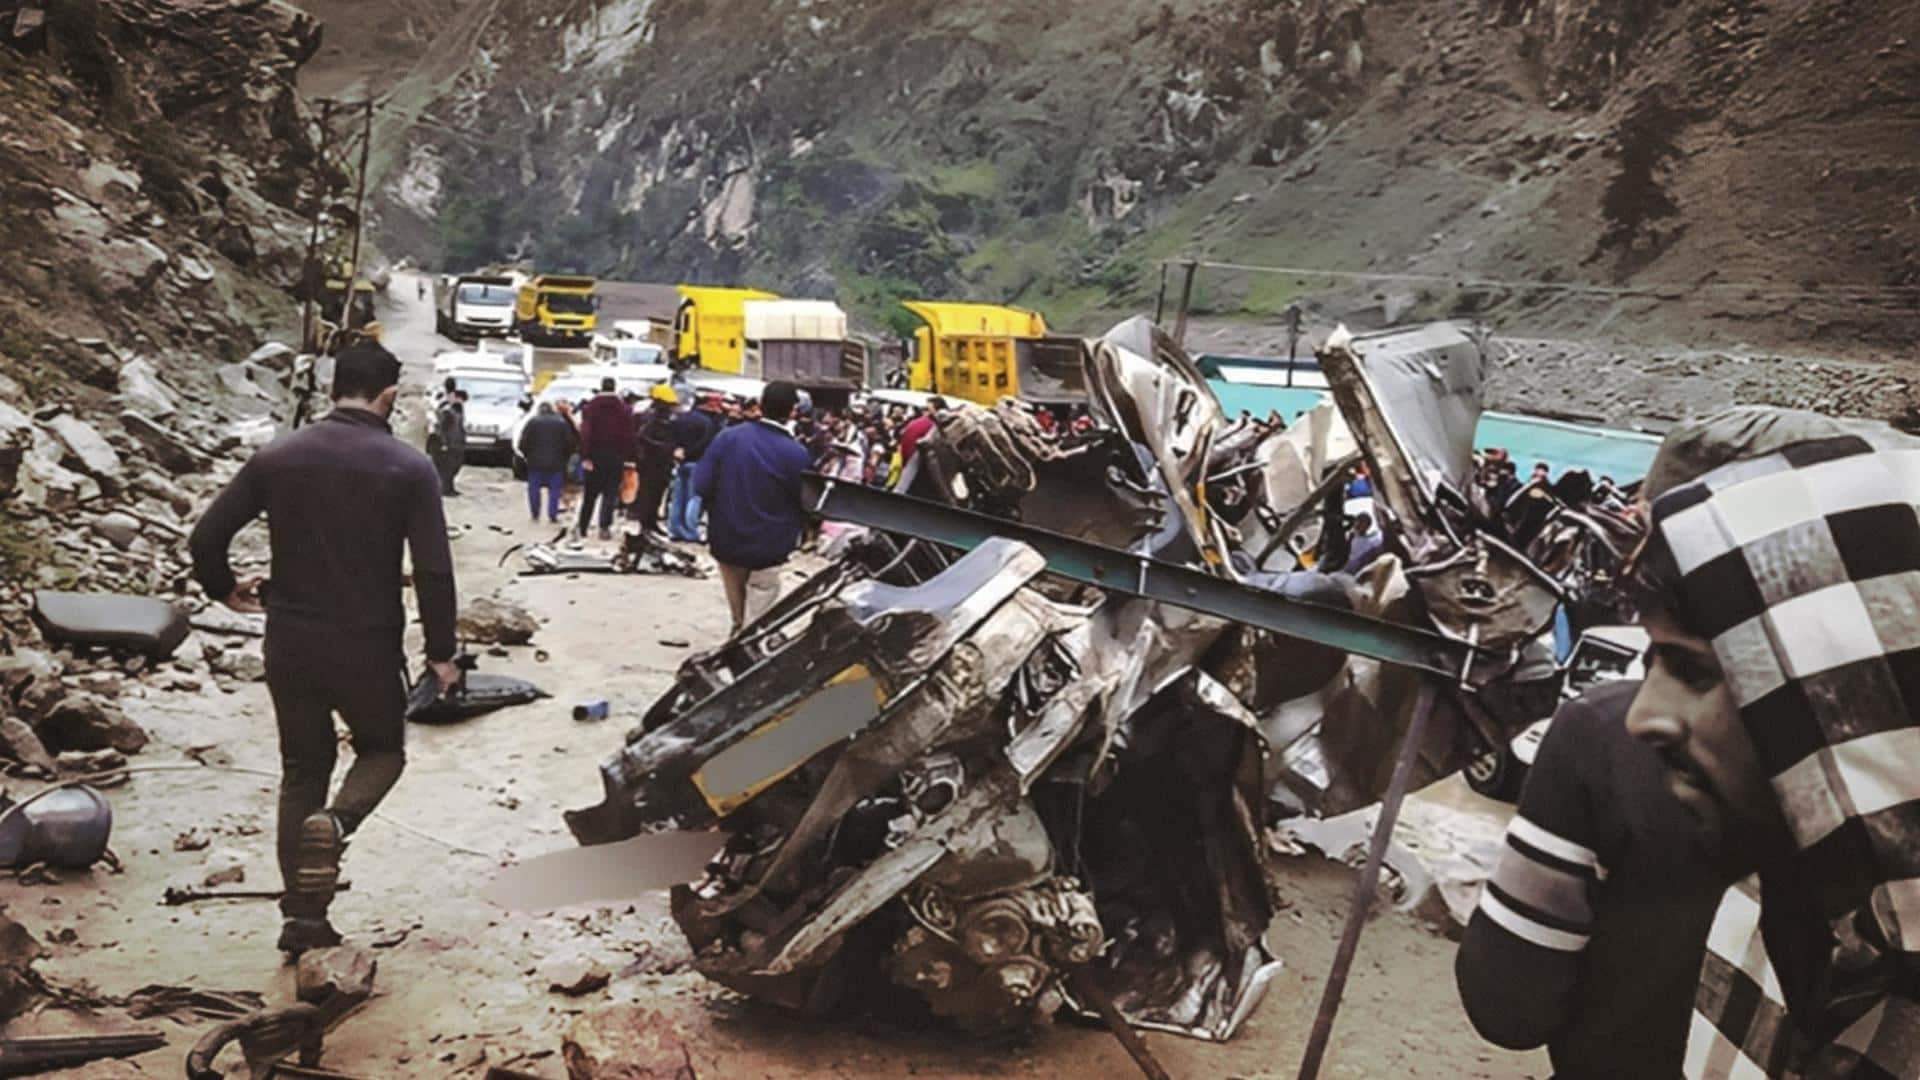 J&K: 7 dead, 1 critically injured in road accident